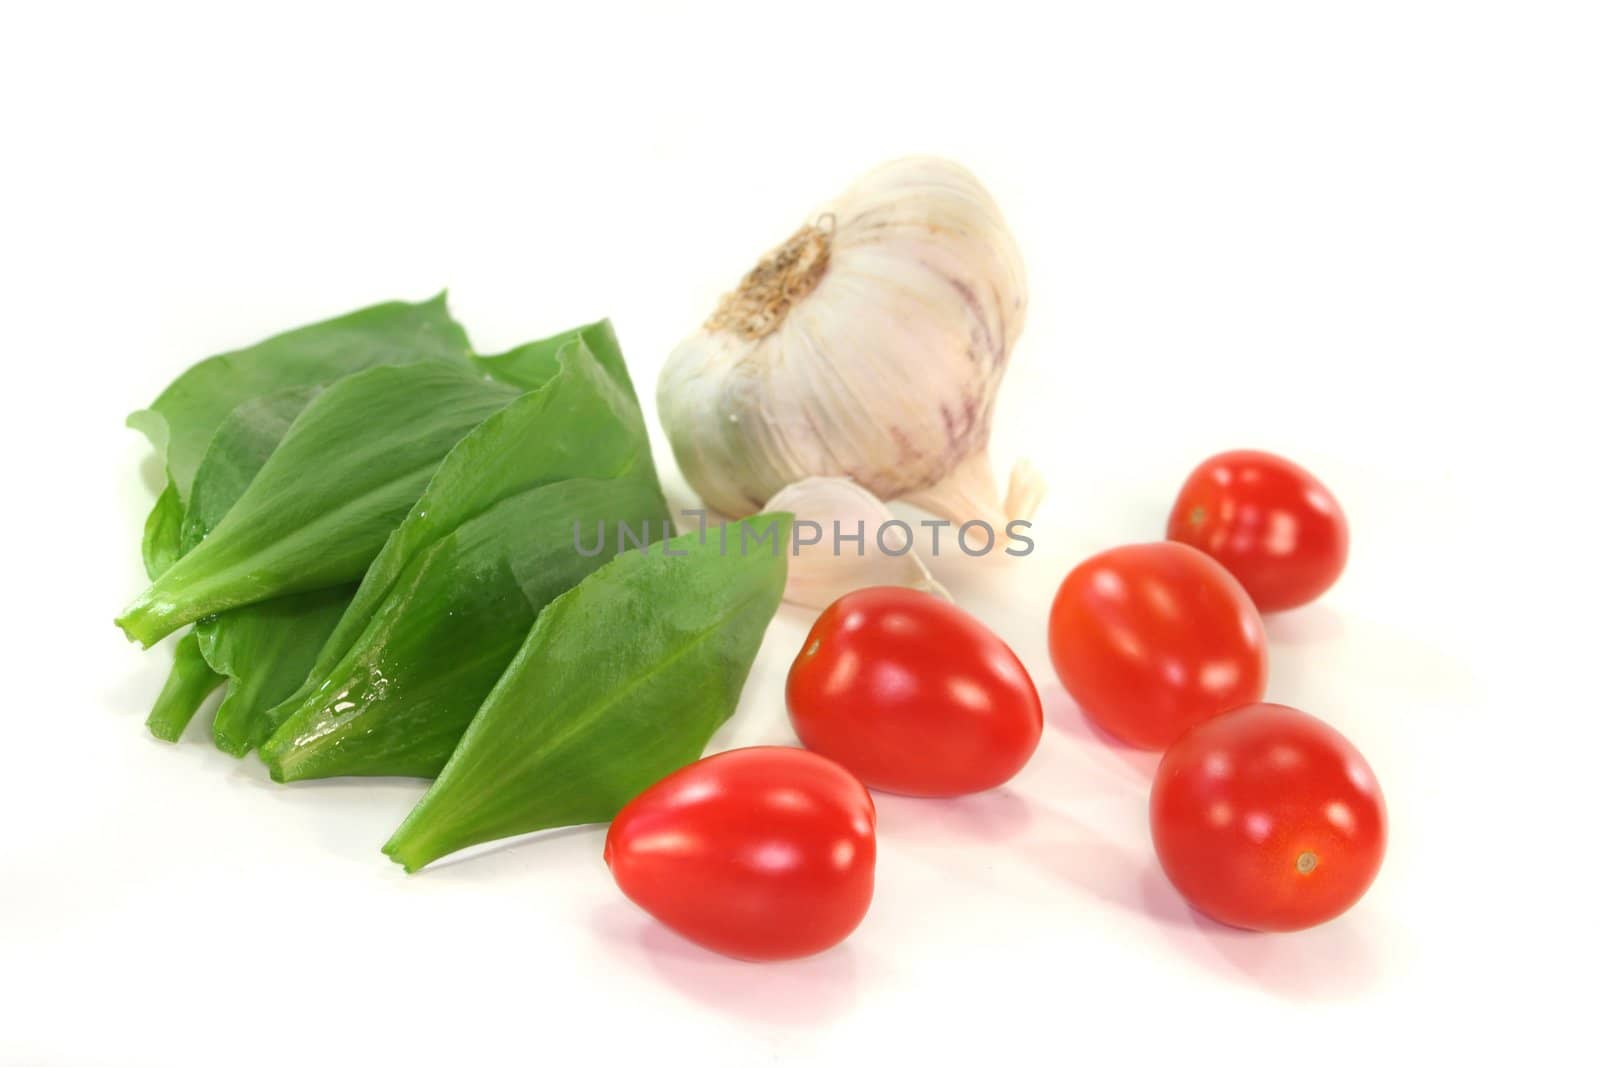 Wild garlic with tomatoes and garlic on a white background